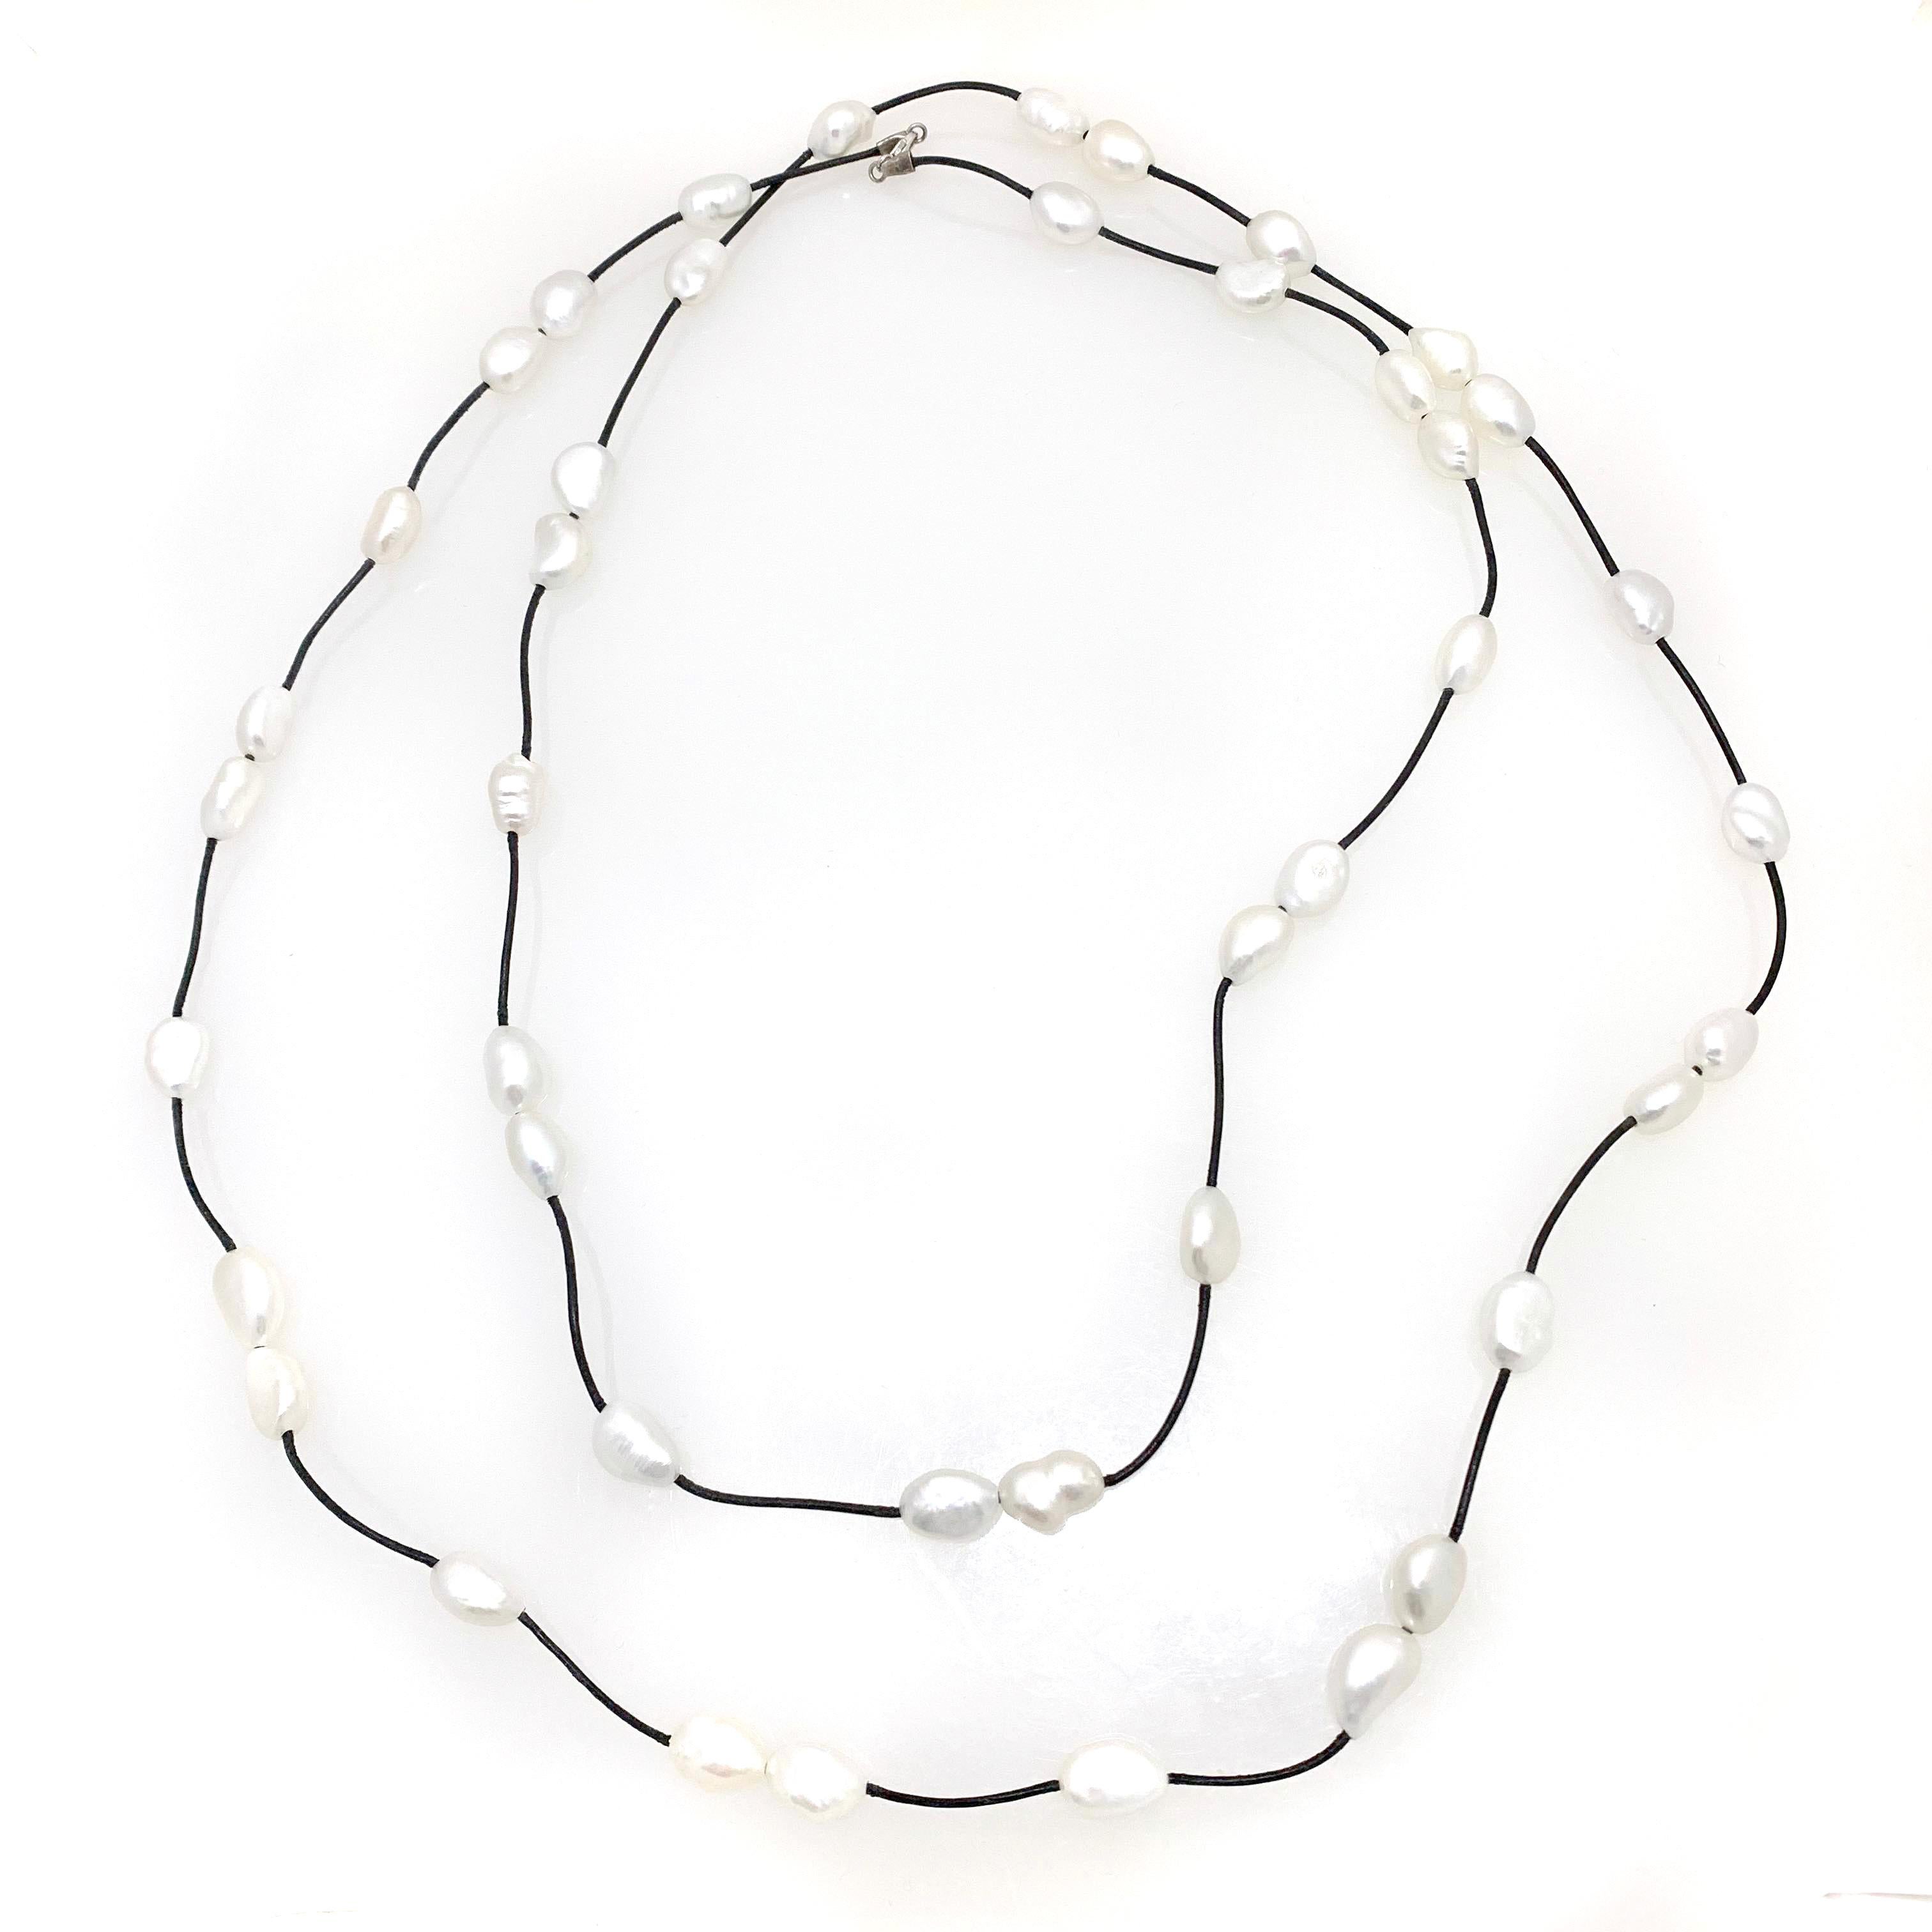 Super chic extra long cultured pearl on leather necklace. 

This necklace features 43 pieces of high luster white cultured pearls strung on black leather cord and closured with sterling silver clasp. The necklace is measured 60